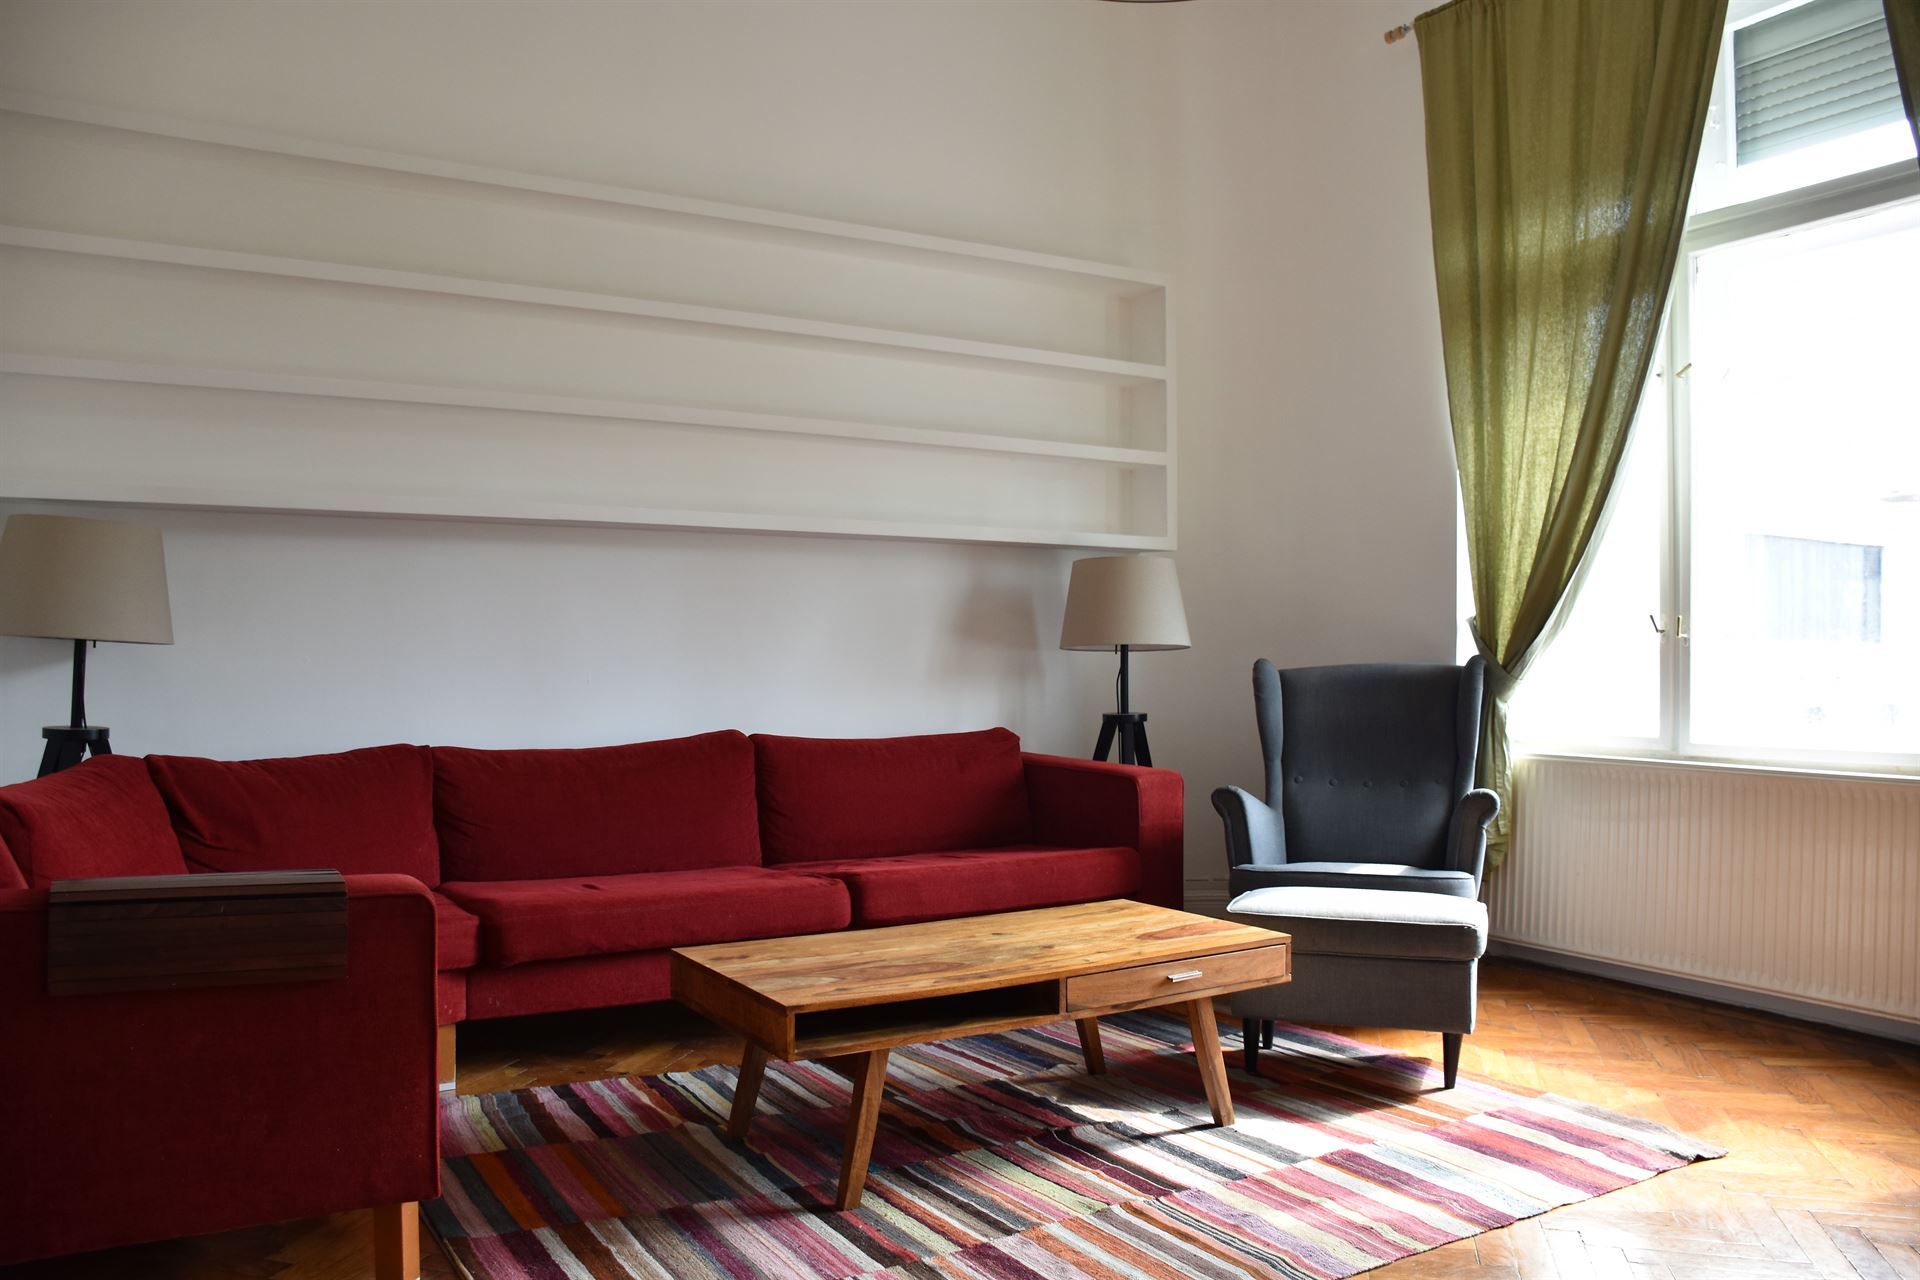 budapest-real-estate-long-term-lease-rental-apartment-downtown-near-opera-big-flat-for-rent-with-balcony4